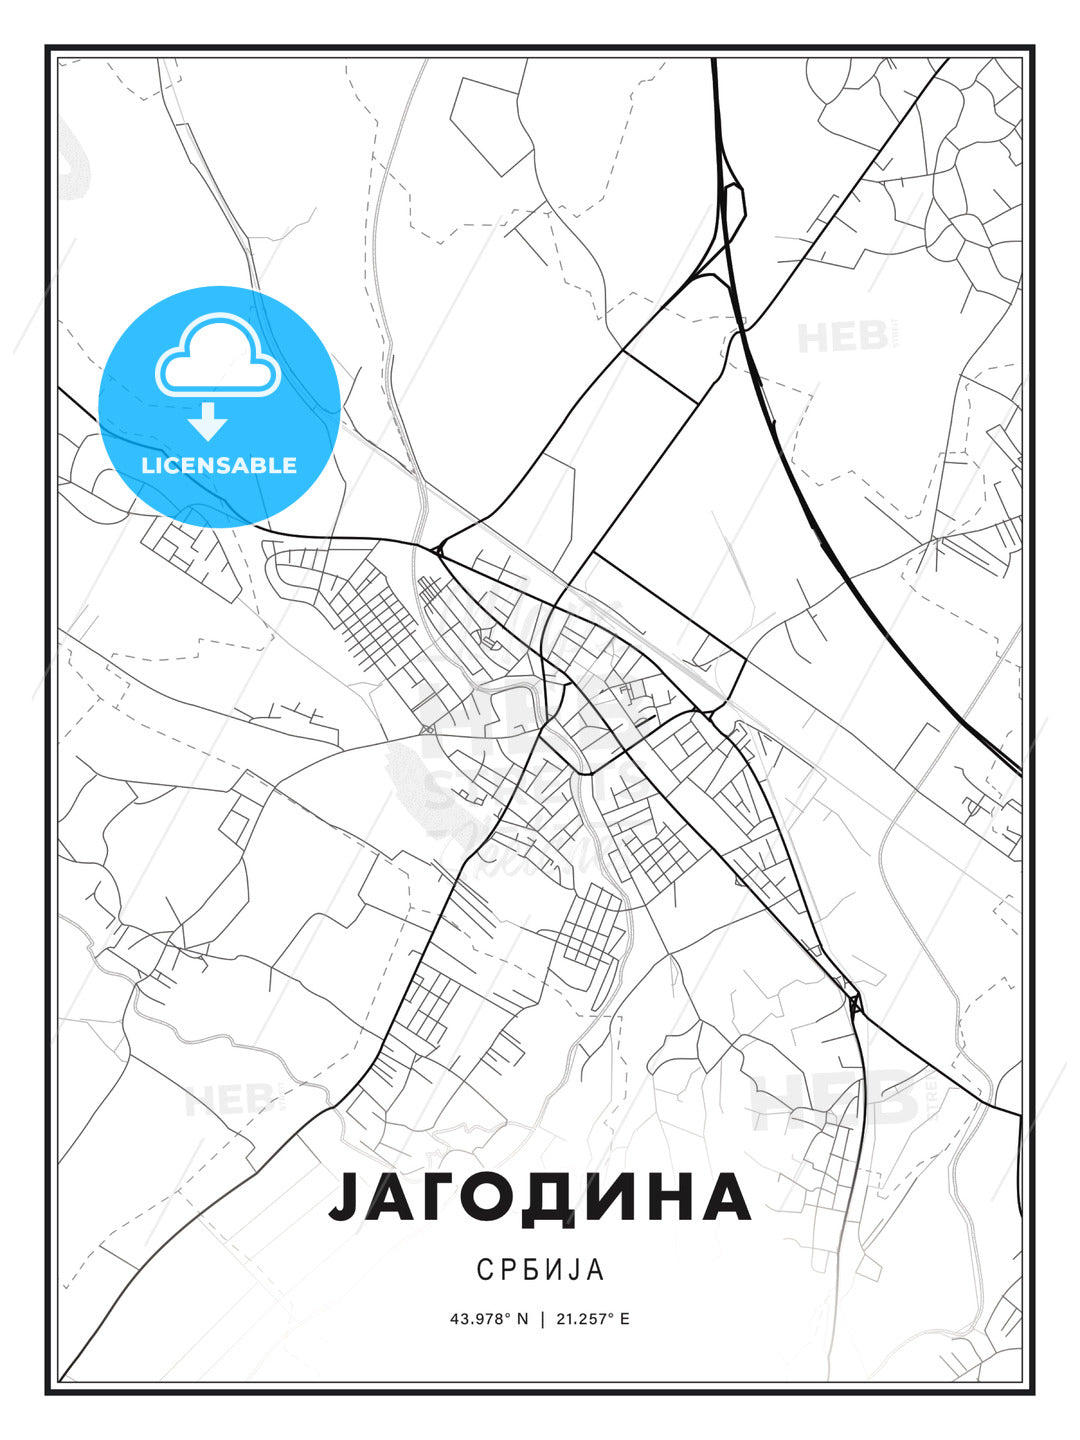 ЈАГОДИНА / Jagodina, Serbia, Modern Print Template in Various Formats - HEBSTREITS Sketches